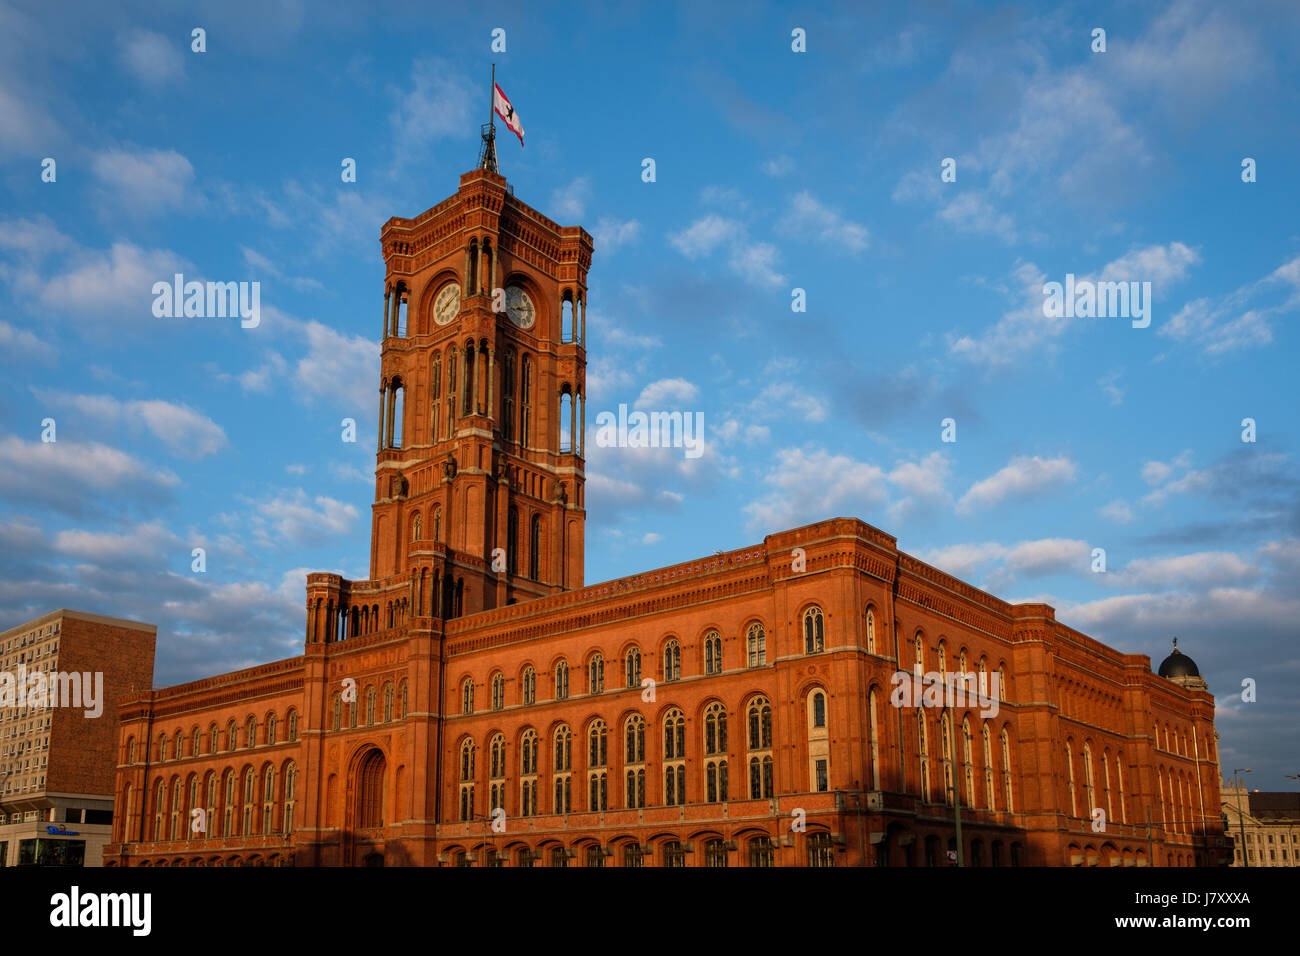 Berlin,Germany - may 24, 2017: The City Hall / Red Town Hall (Rotes Rathaus) in Berlin, Germany Stock Photo